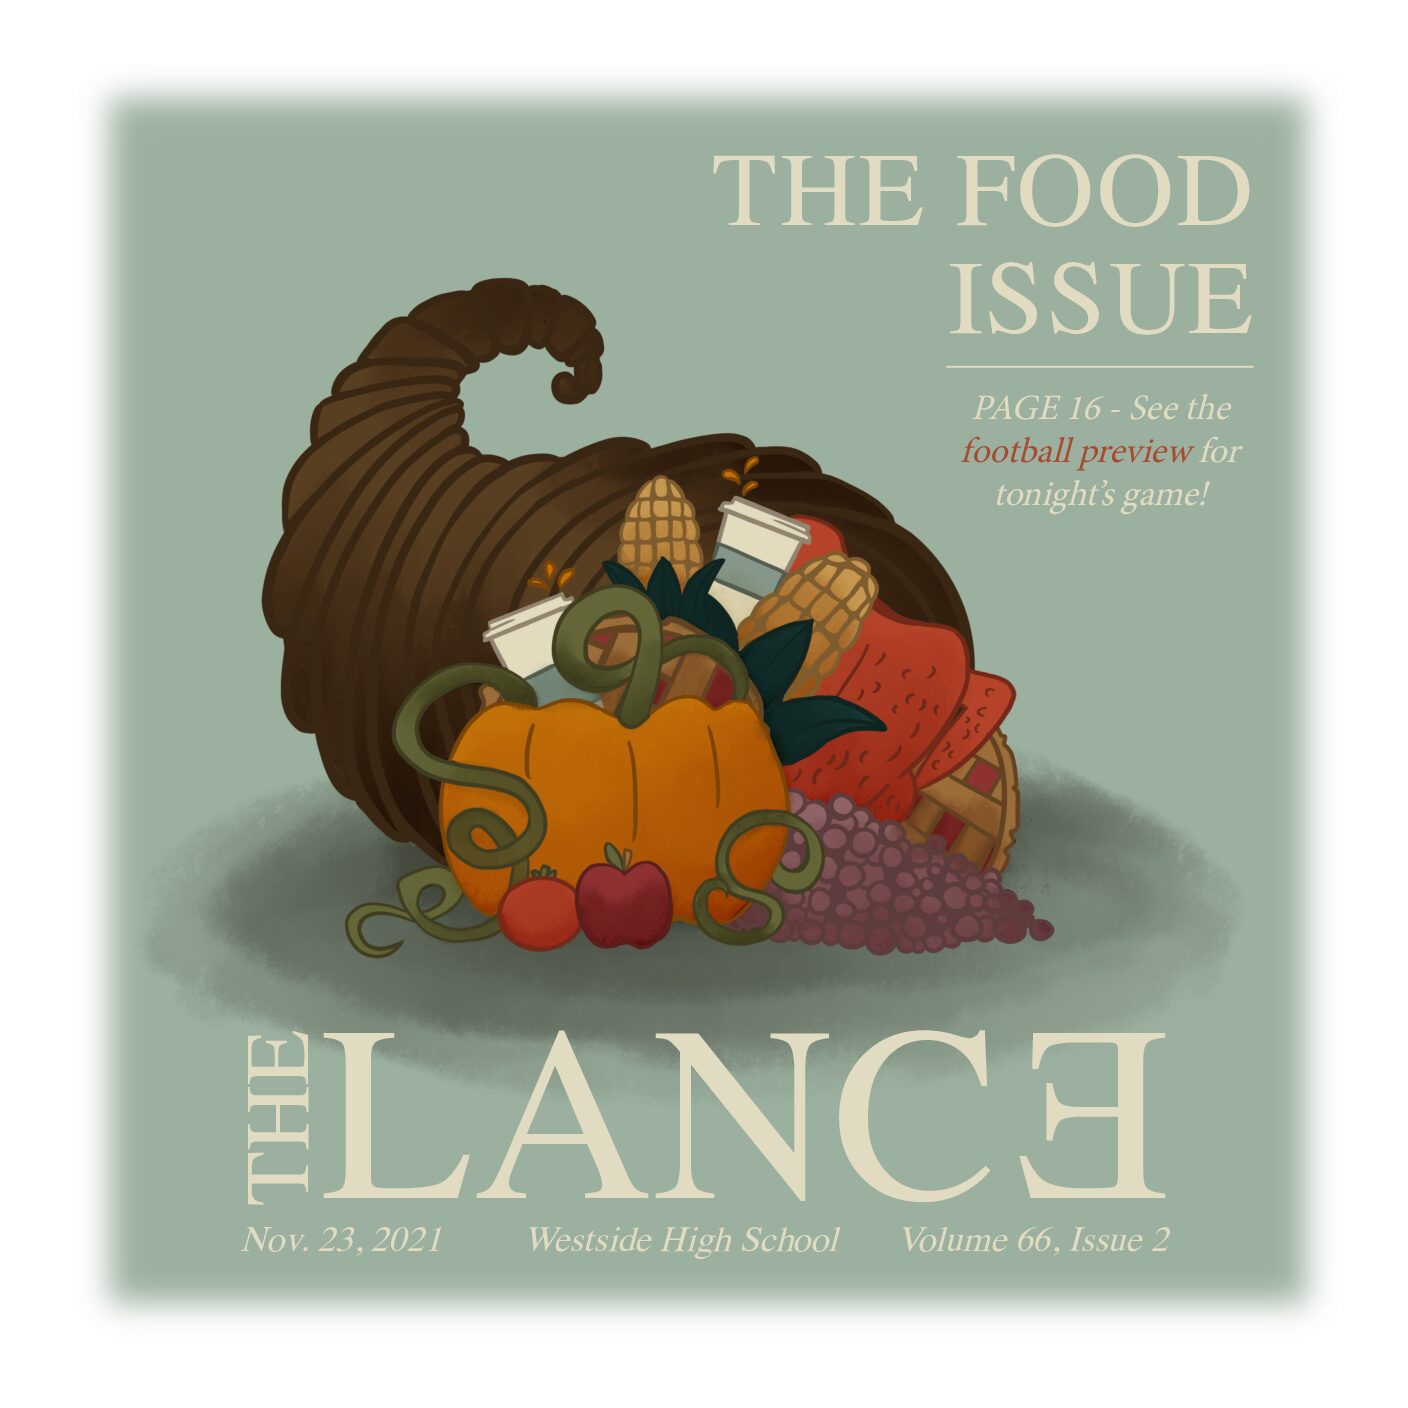 The Lance Volume 66 Issue 2